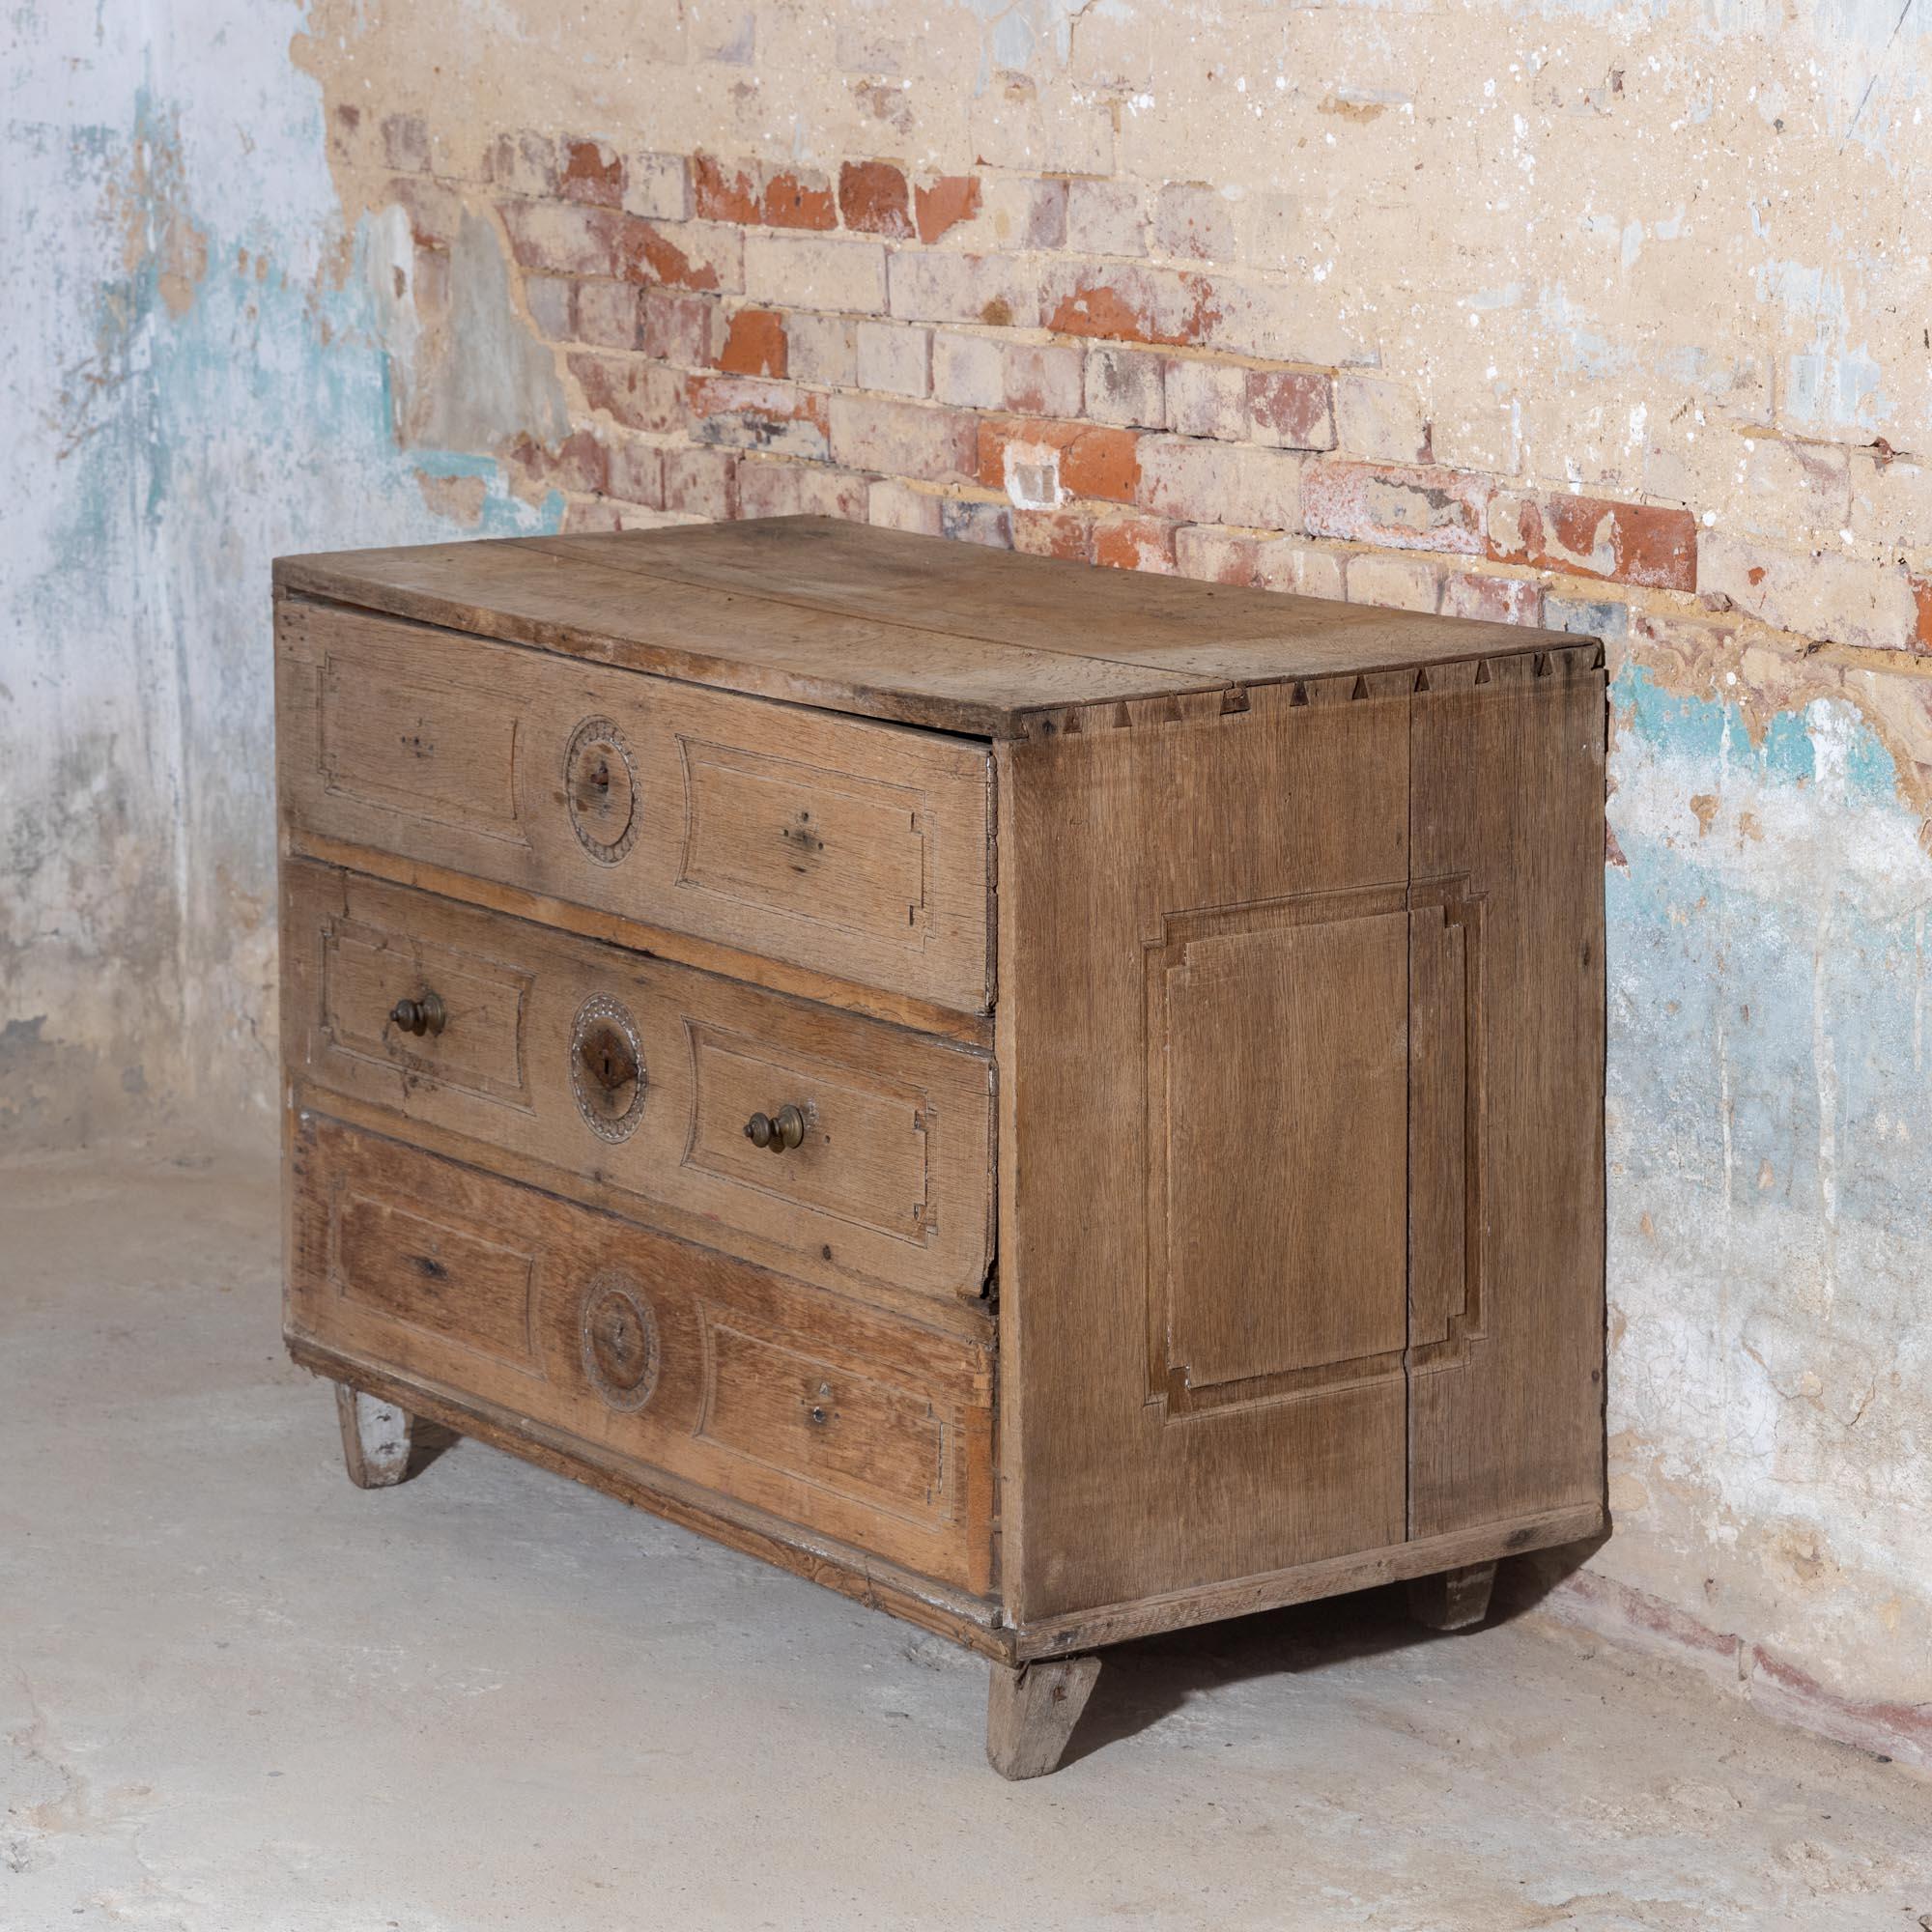 Provincial Louis Seize chest of drawers with three drawers and decorative panels on the front and sides. The chest of drawers is made of solid oak and is in an unrestored condition.